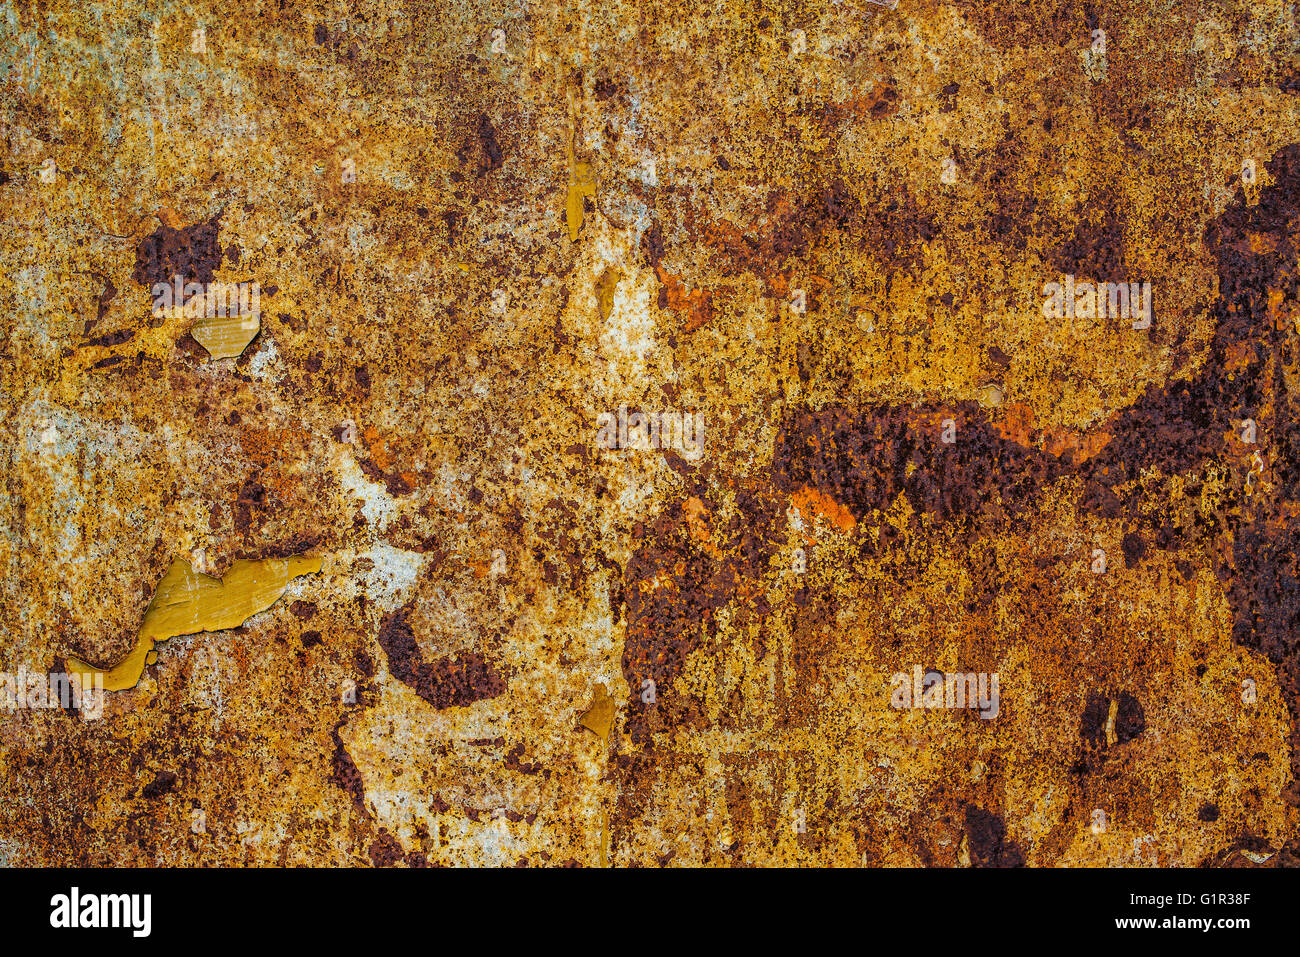 Obsolete piece of scrap metal corroding, texture of old rusty industrial steel plate surface Stock Photo